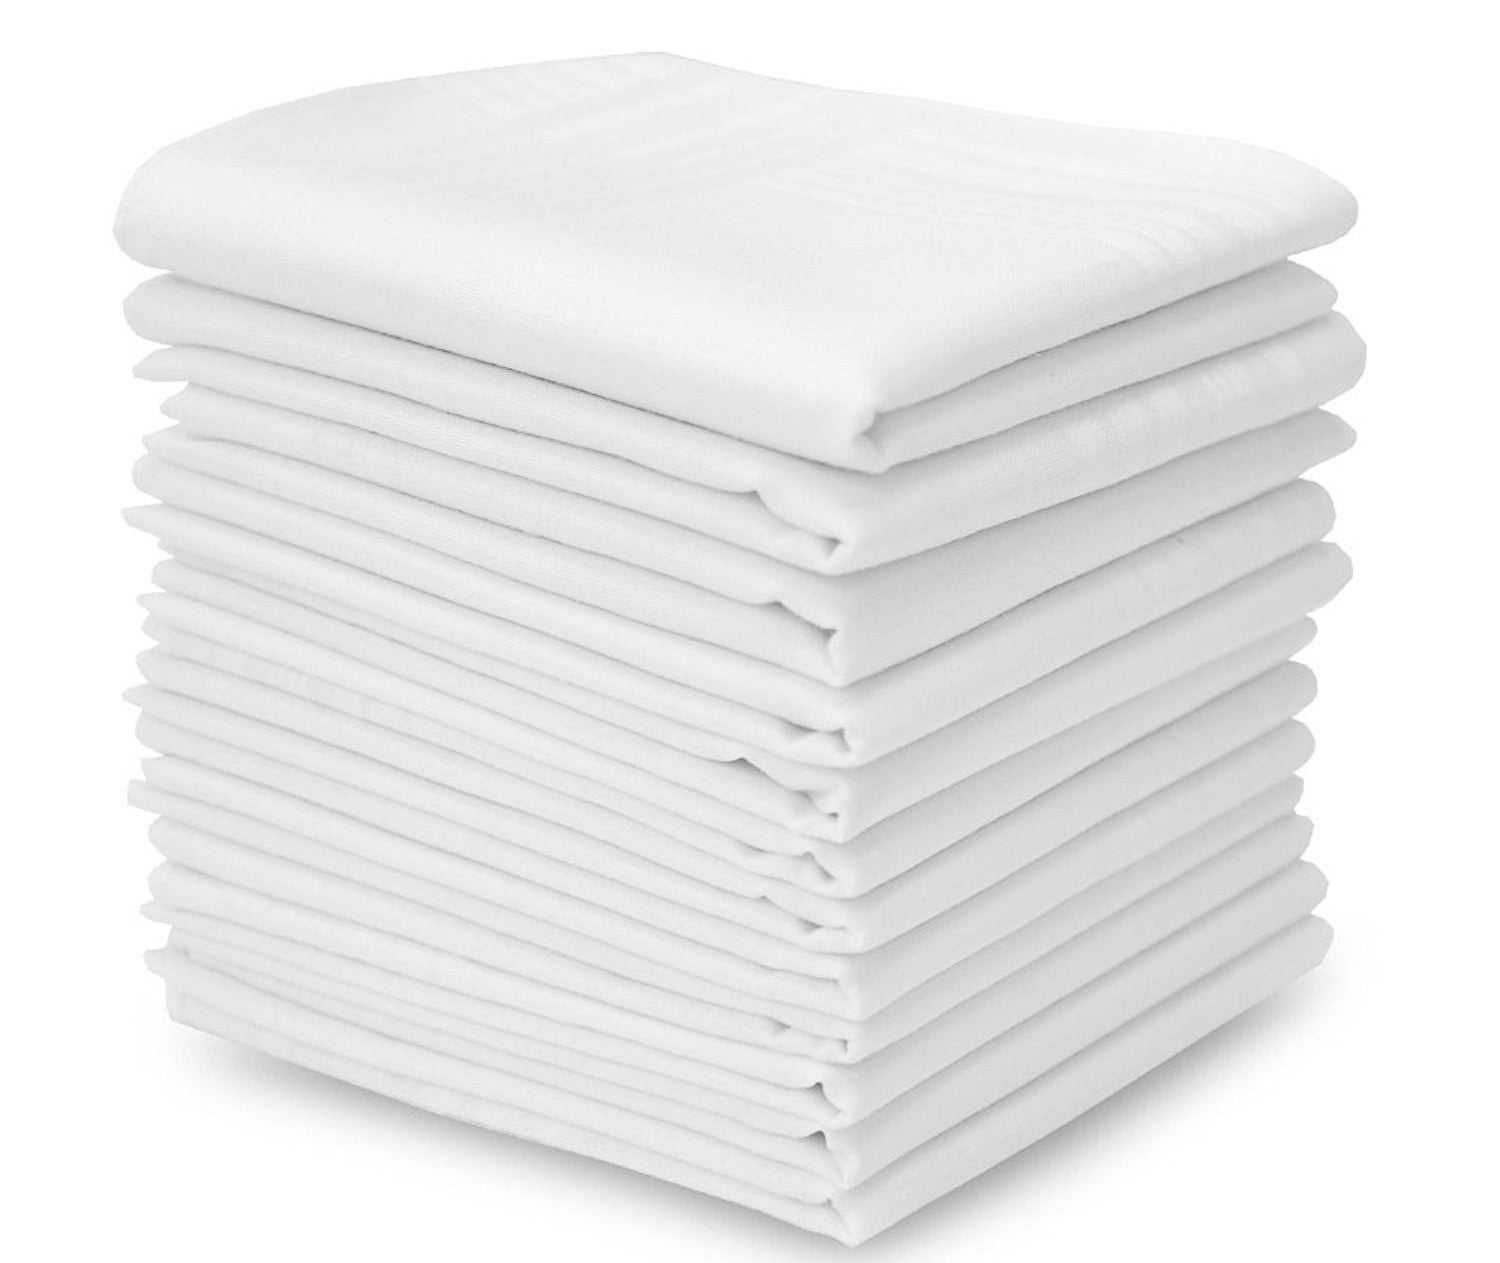 A stack of folded handkerchiefs. 